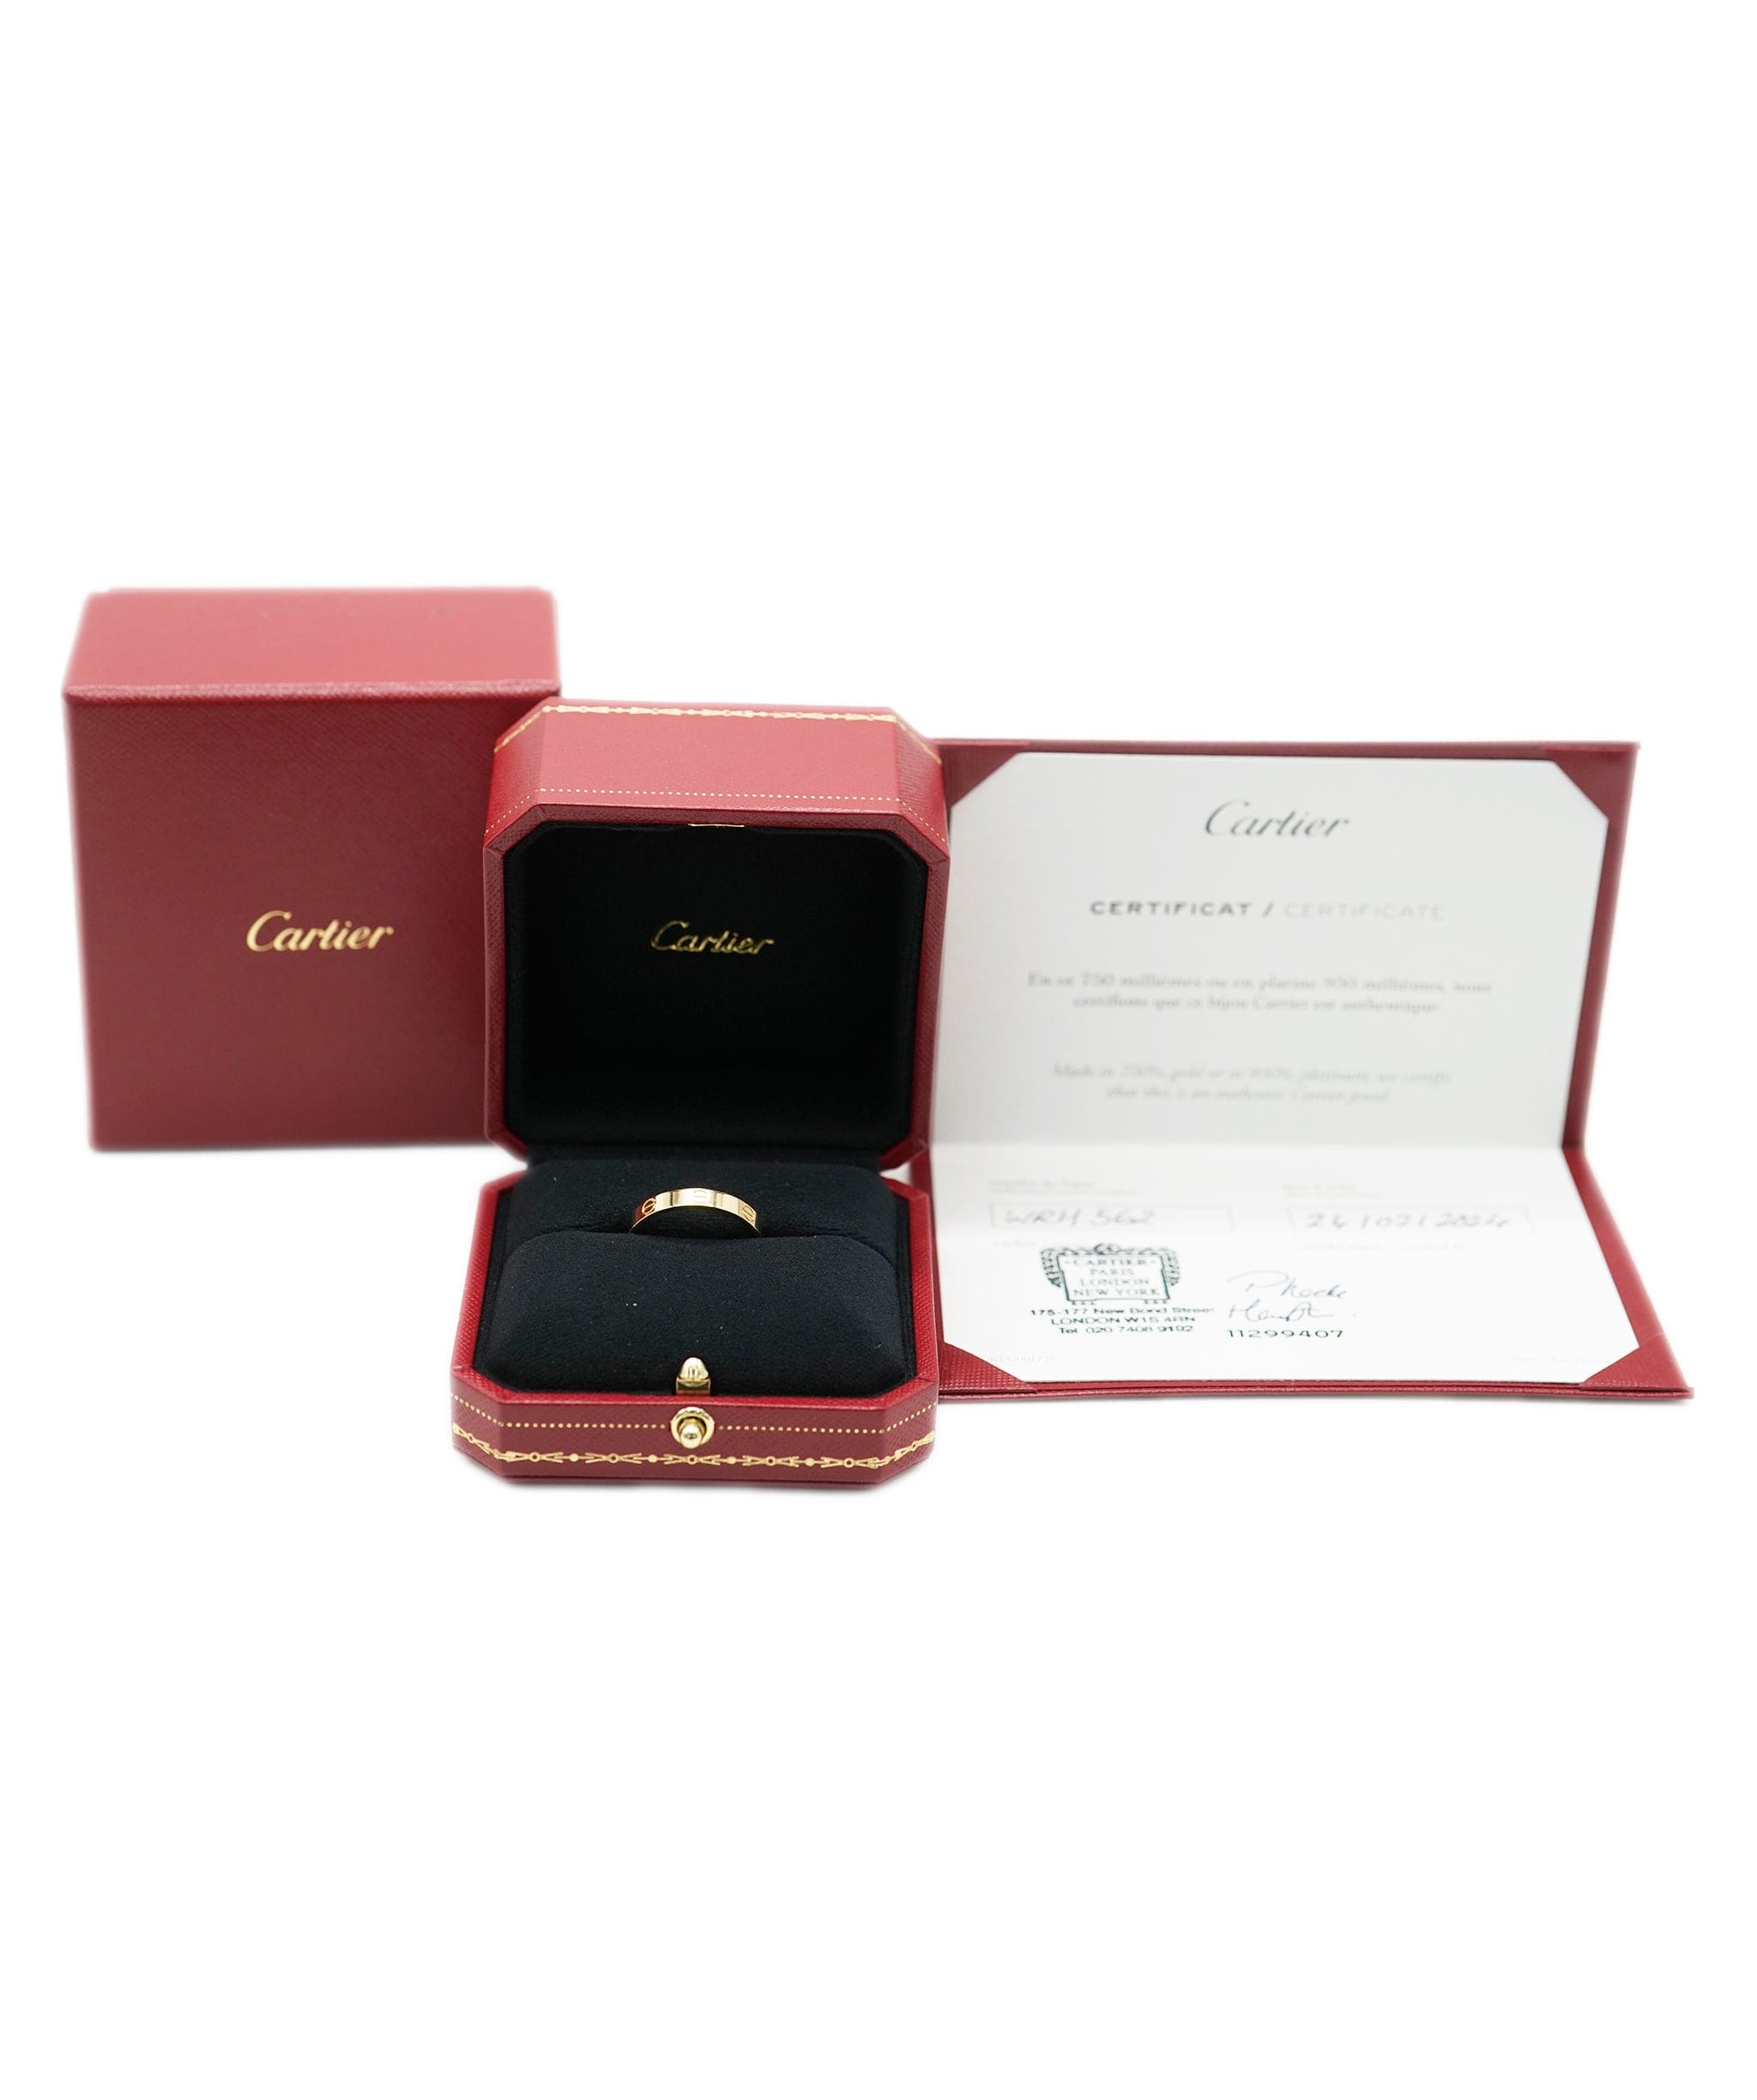 Cartier Cartier Thin Love Ring, Size 64 ABC0747